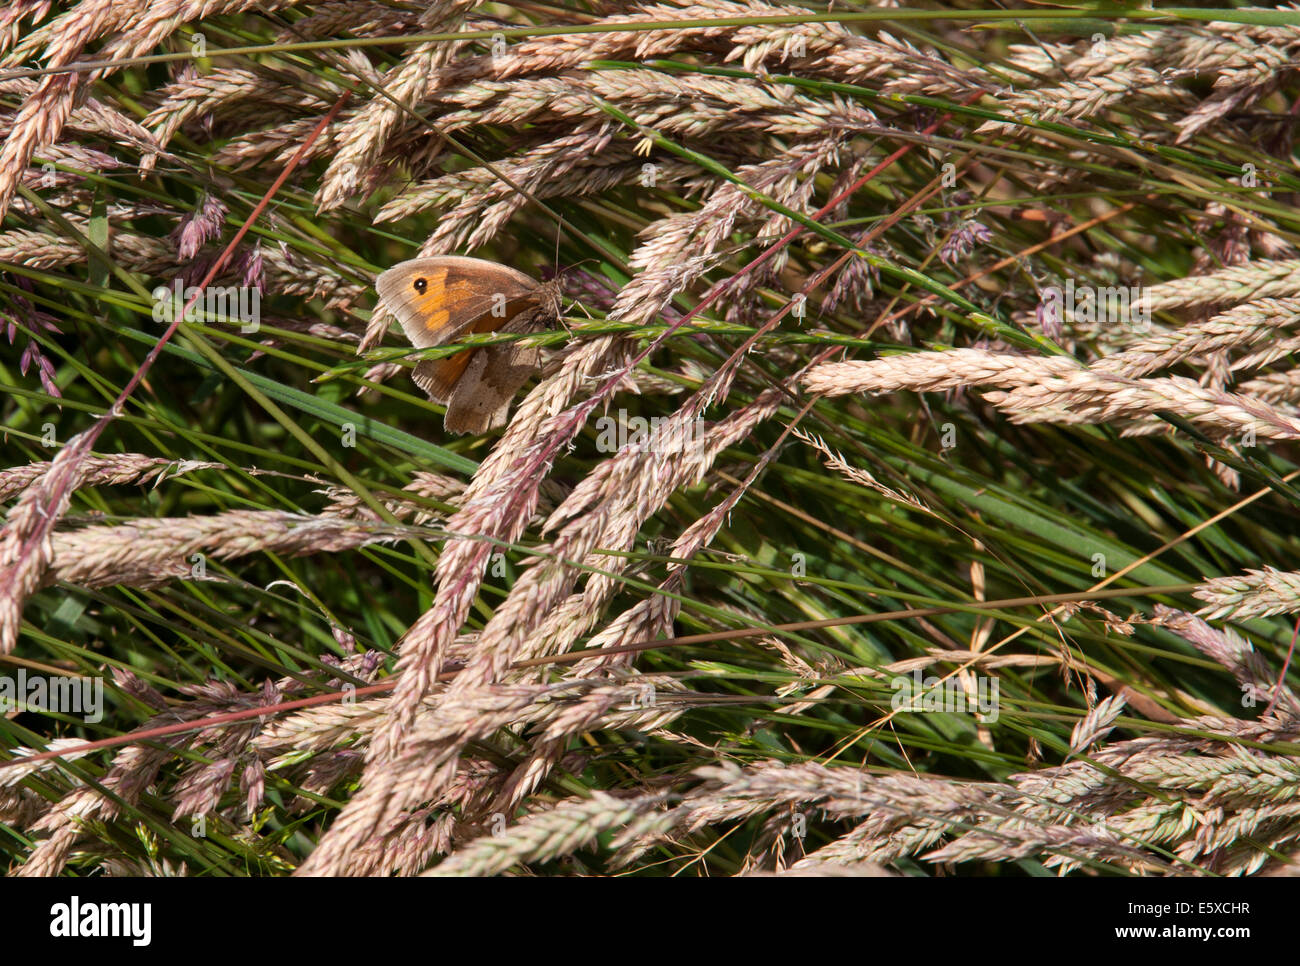 Hedge Brown or Gatekeeper Butterfly sheltering in grasses Stock Photo